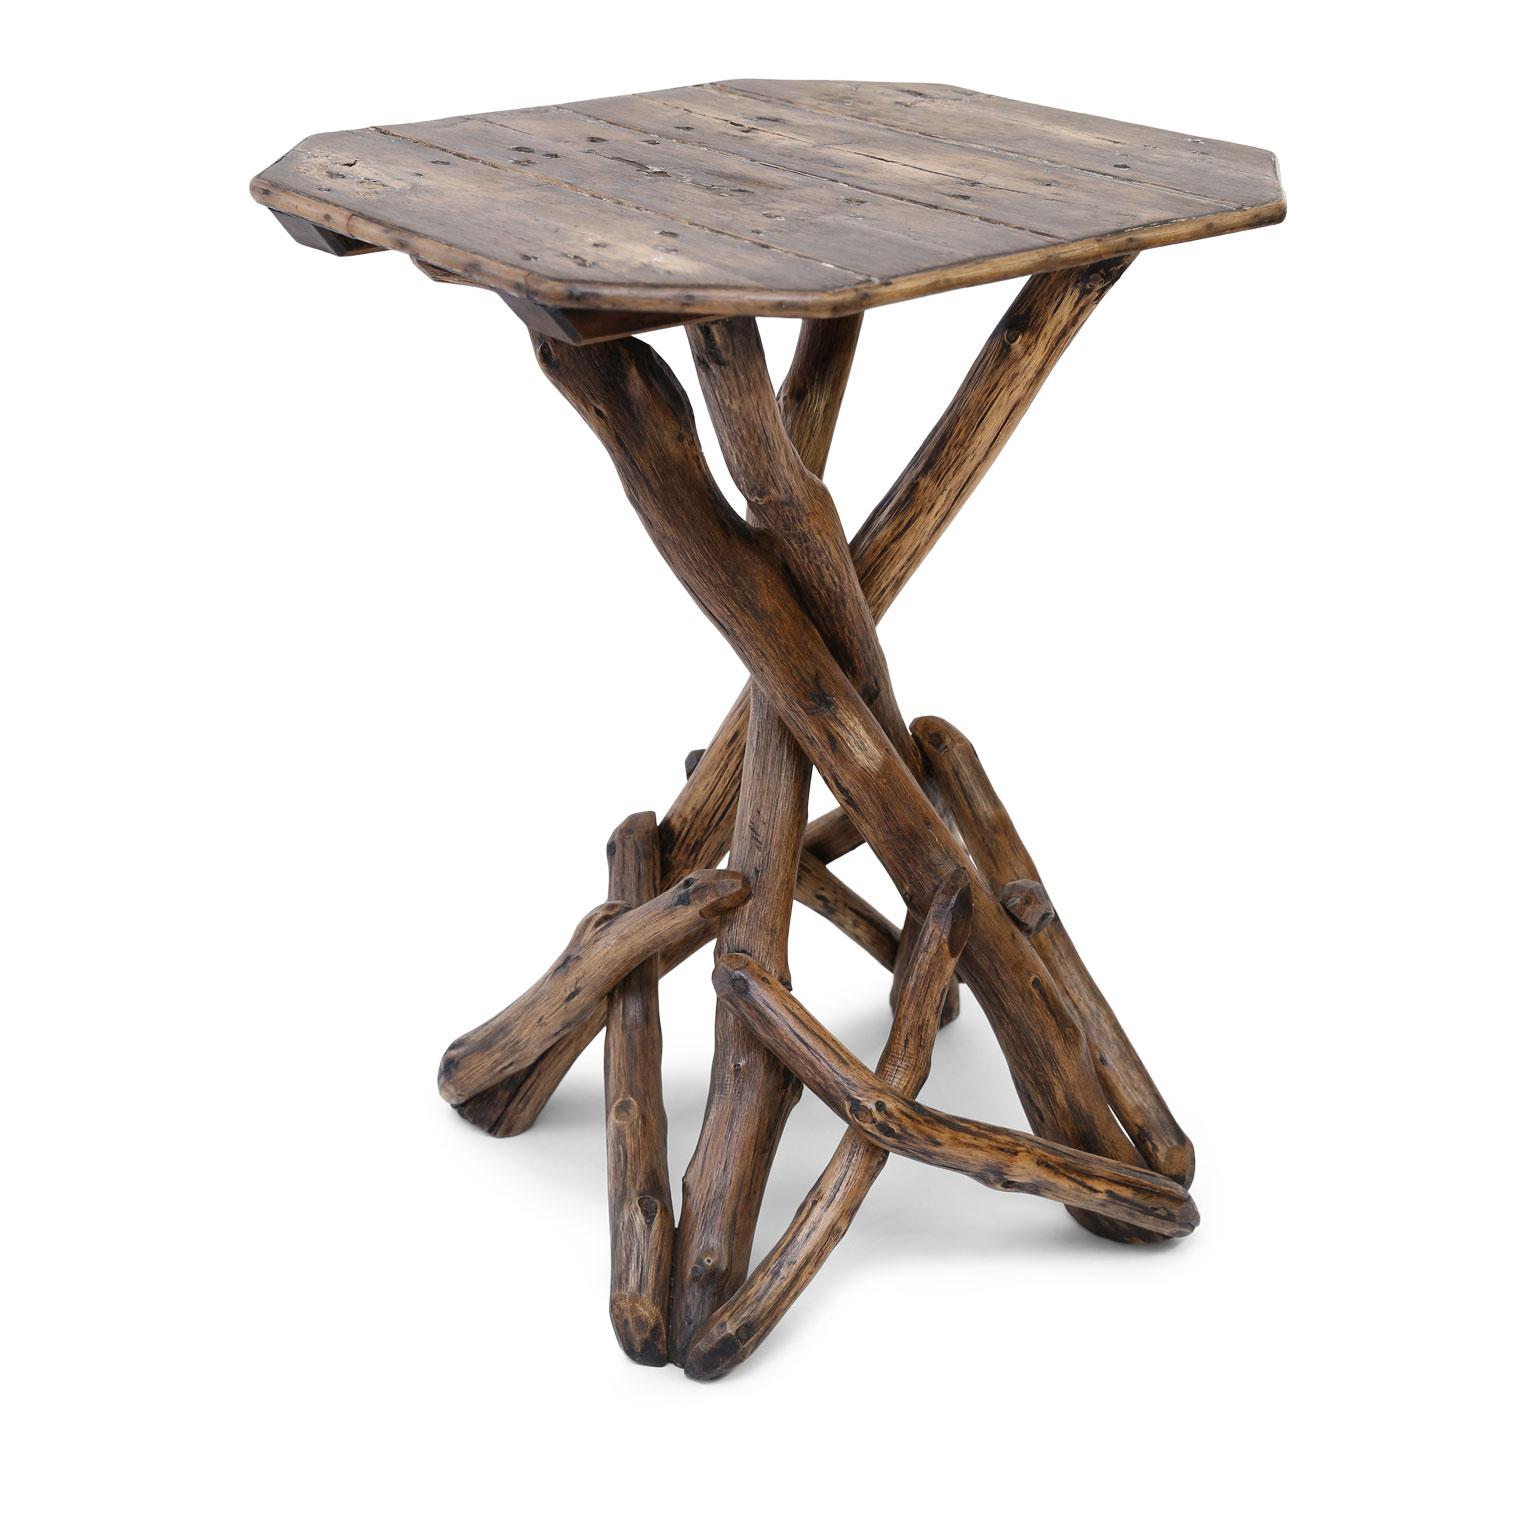 English twig table, created circa 1875 to furnish a rustic summer house. In very good, solid, stabile and strong condition. Perfect to serve as a decorative and unusual side table or, as intended, in a summer house or conservatory.